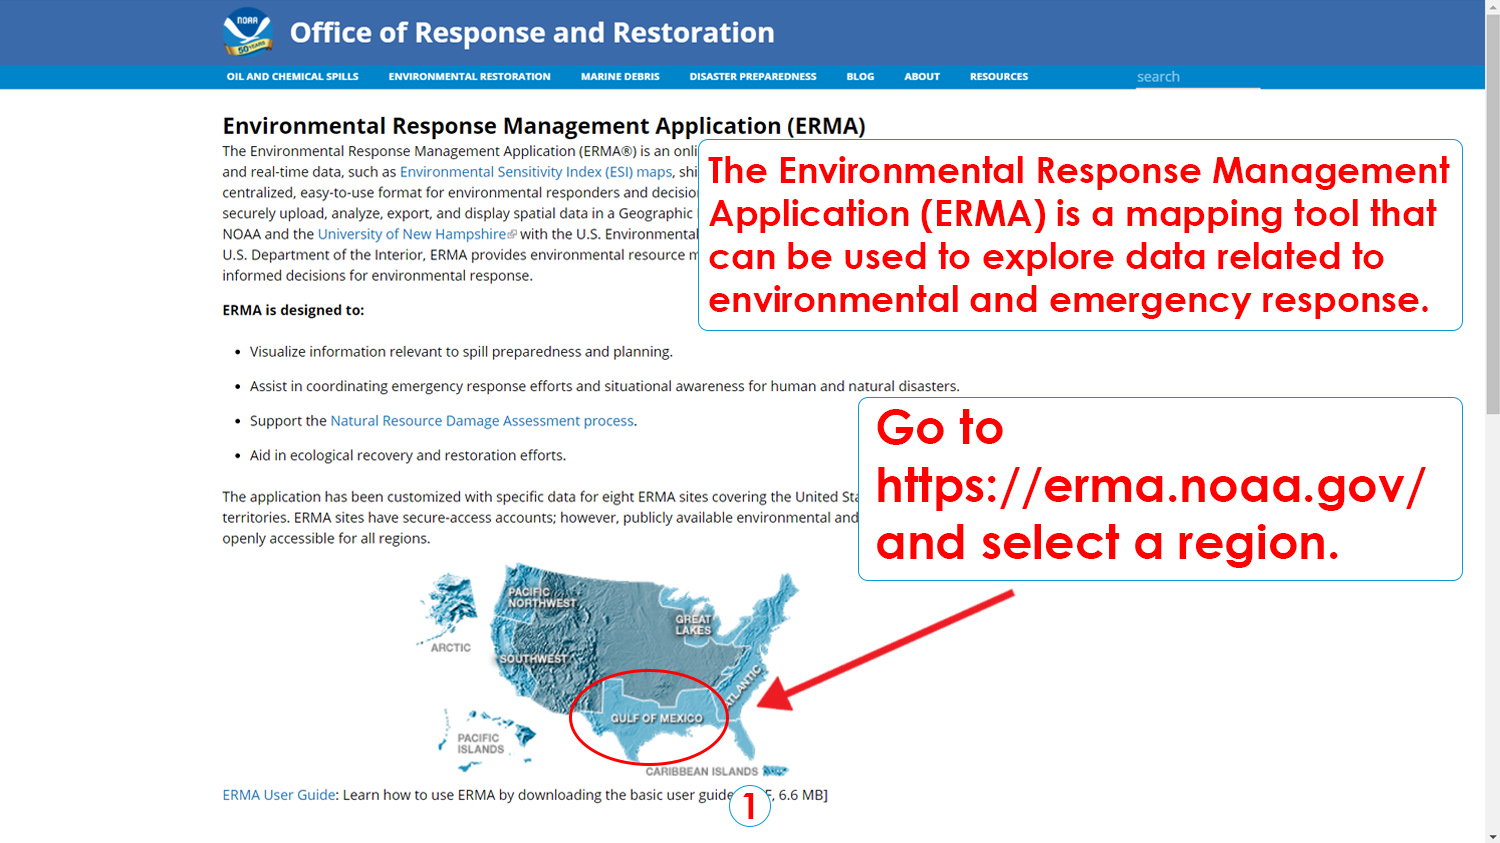 Step 1: Go to https://erma.noaa.gov and select a region. 
The Environmental Response Management Application (ERMA) is a mapping tool that can be used to explore data related to environmental and emergency response. 